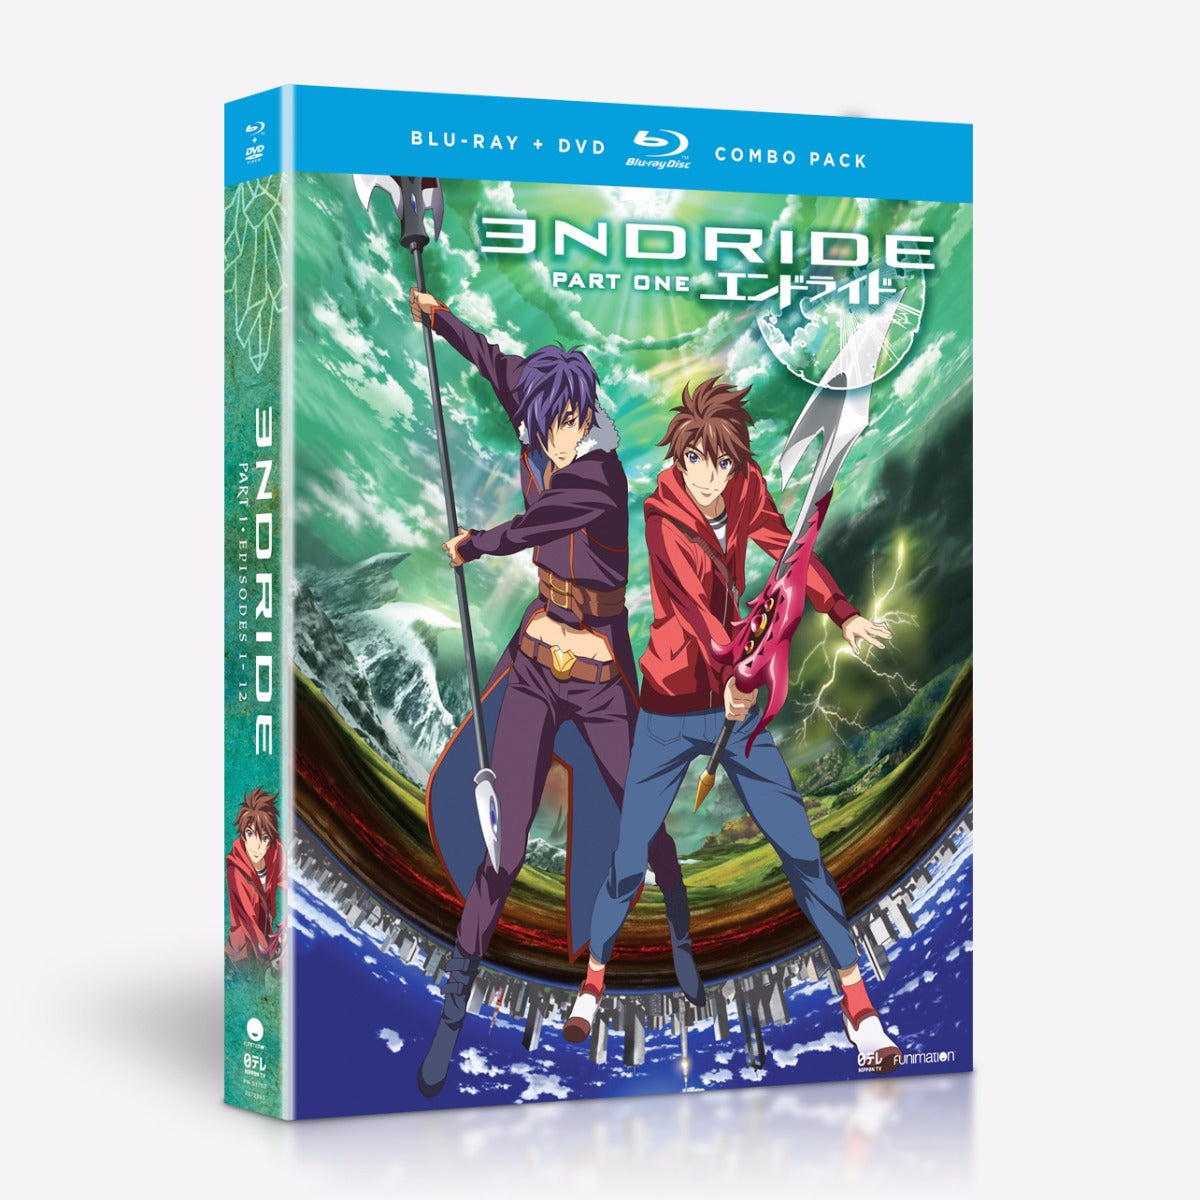 Endride - Part 1 - Blu-ray + DVD image count 0